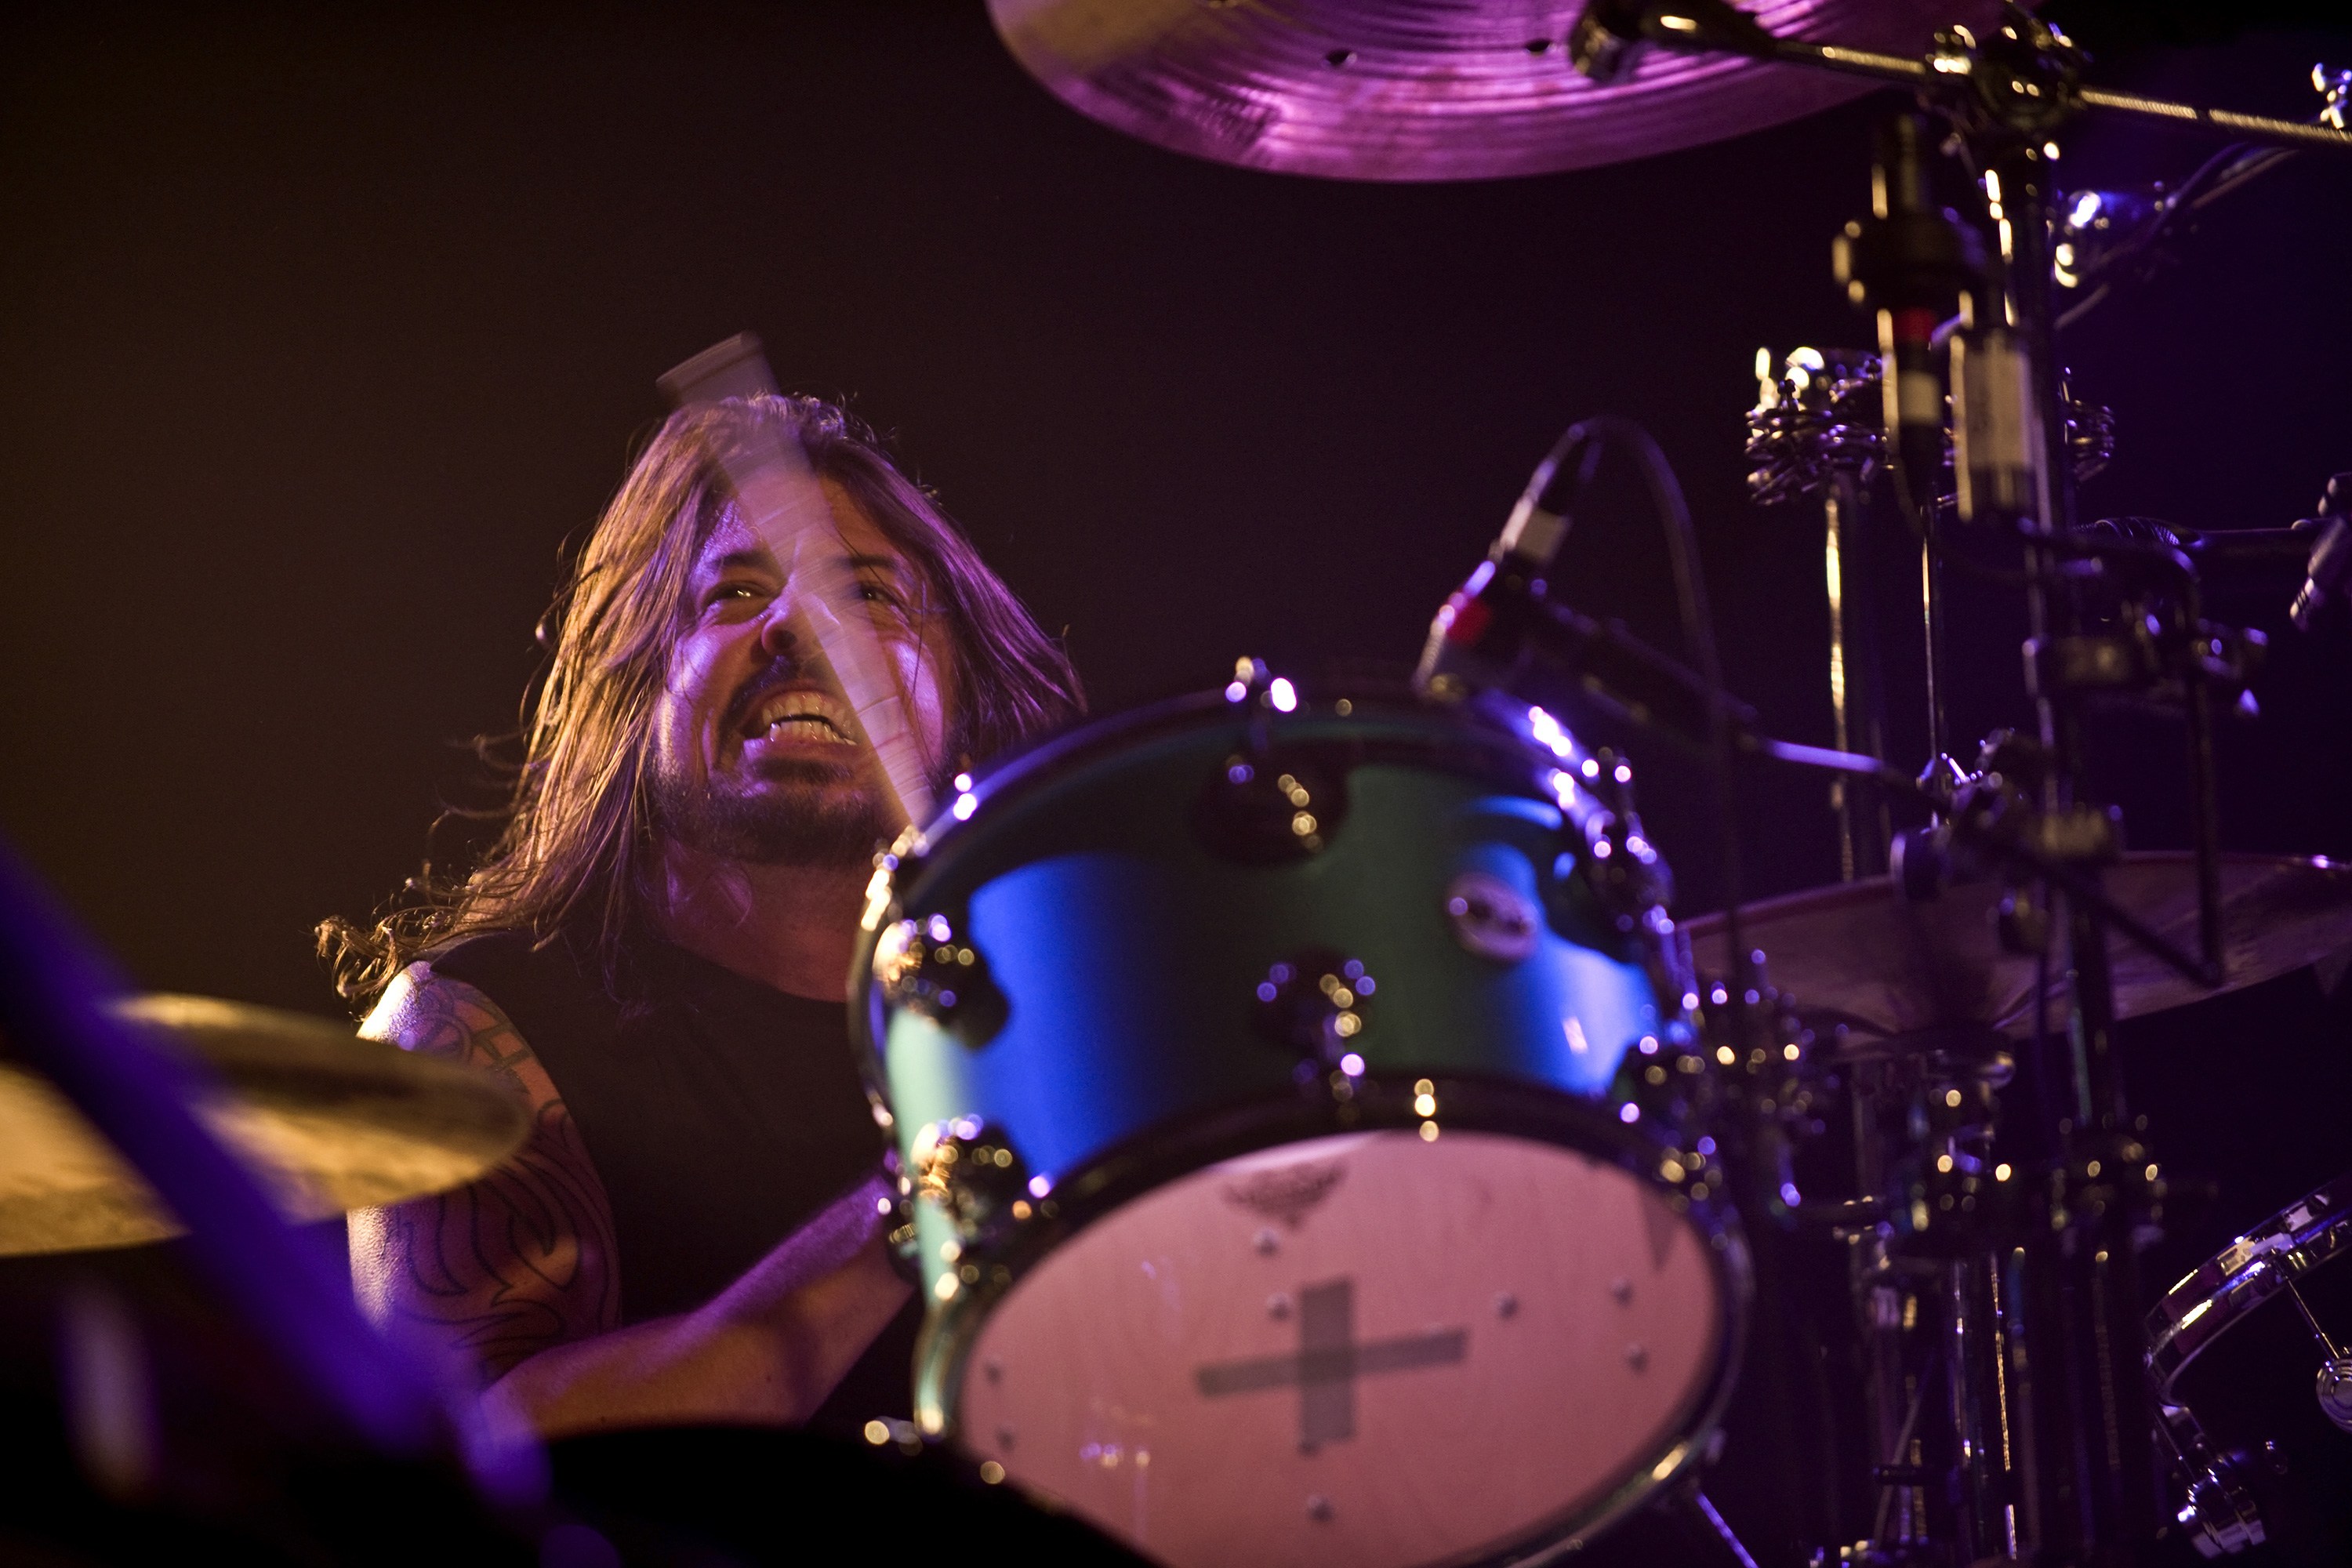 Dave Grohl - Drums